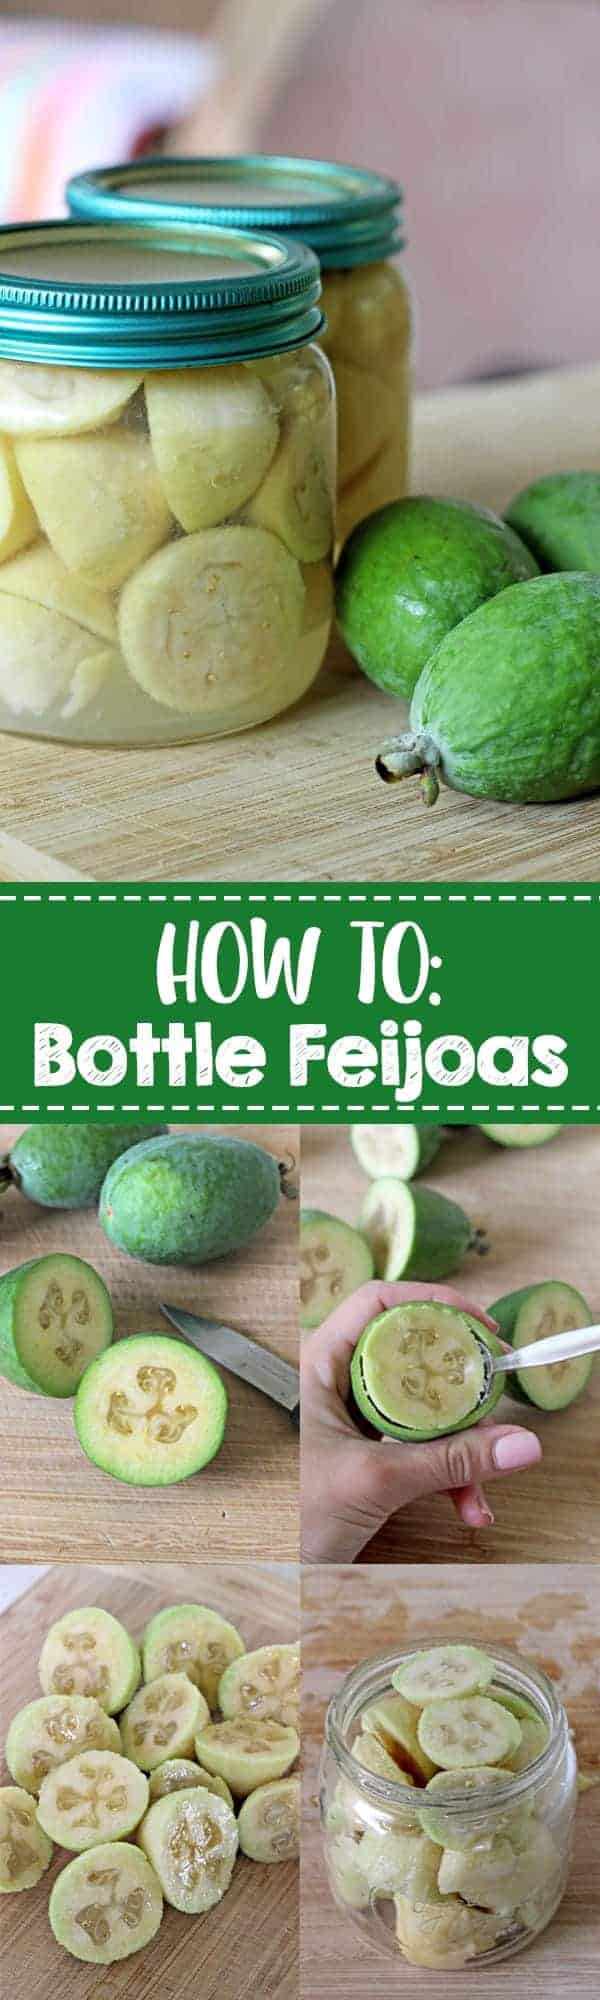 Bottles of preserved feijoas with step by step photos of how to bottle feijoas